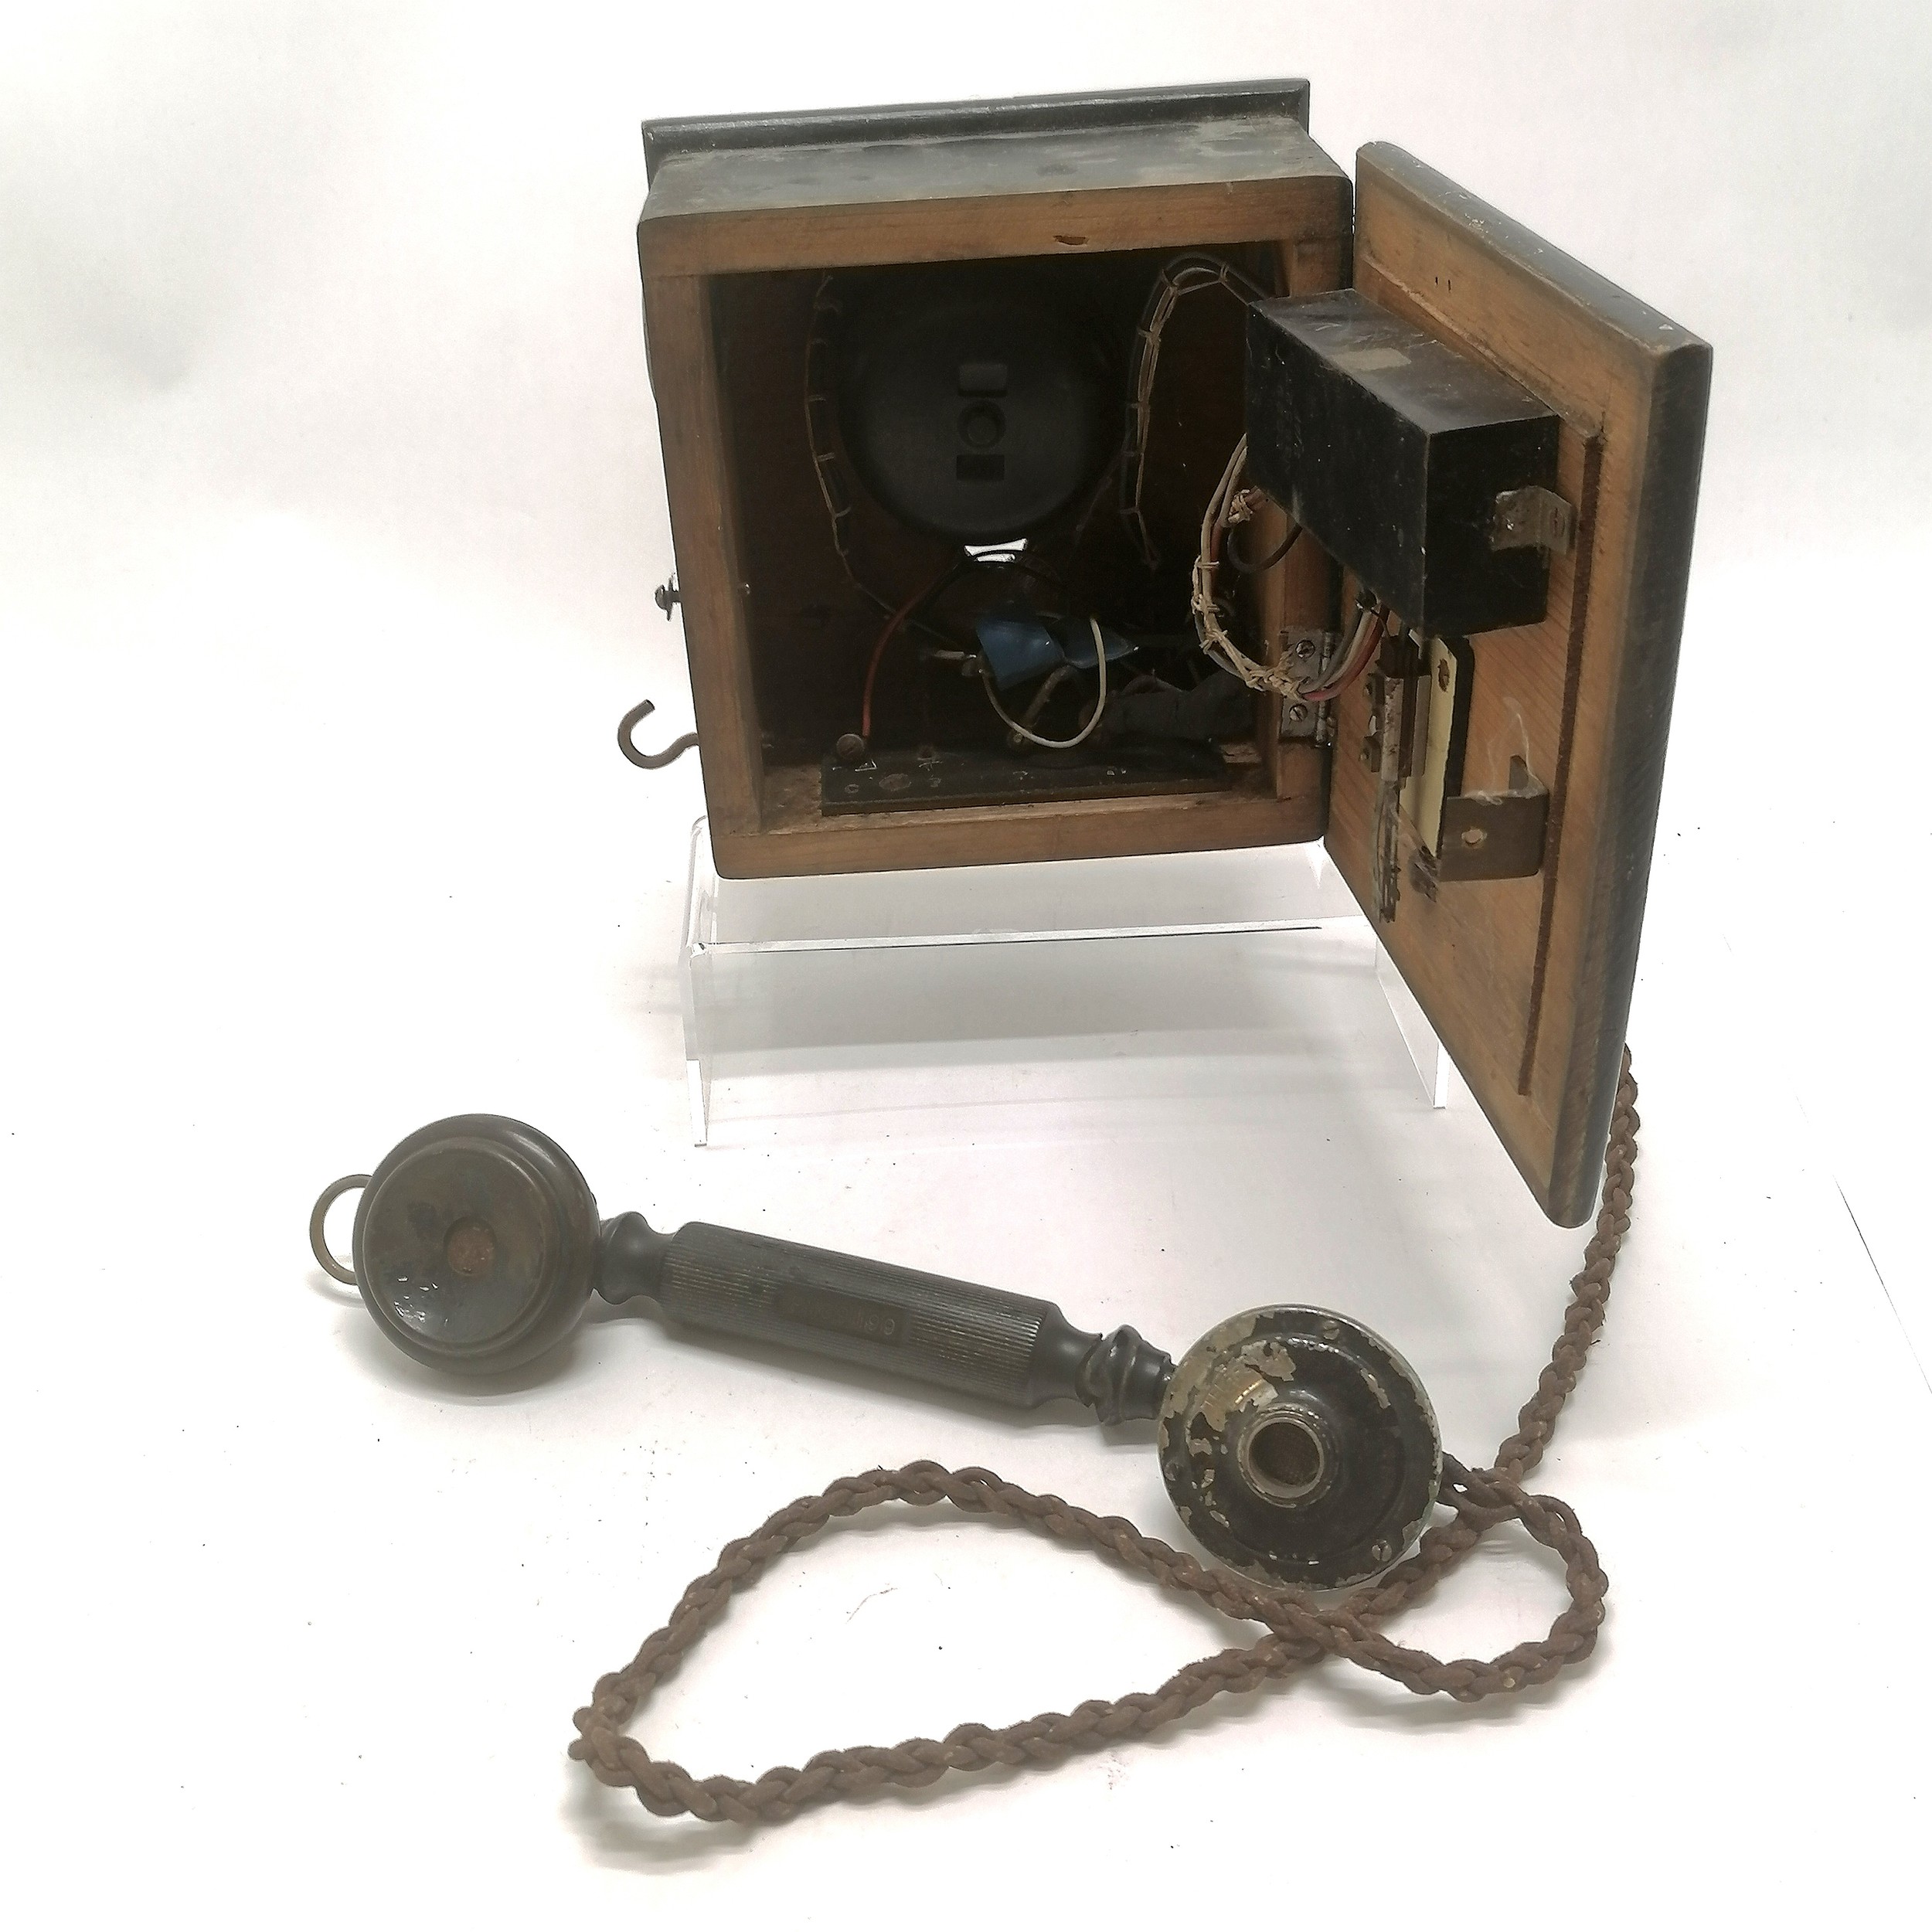 Electric Signals Ltd, Sydney railway telephone with morse code button to front - receiver length - Image 2 of 5